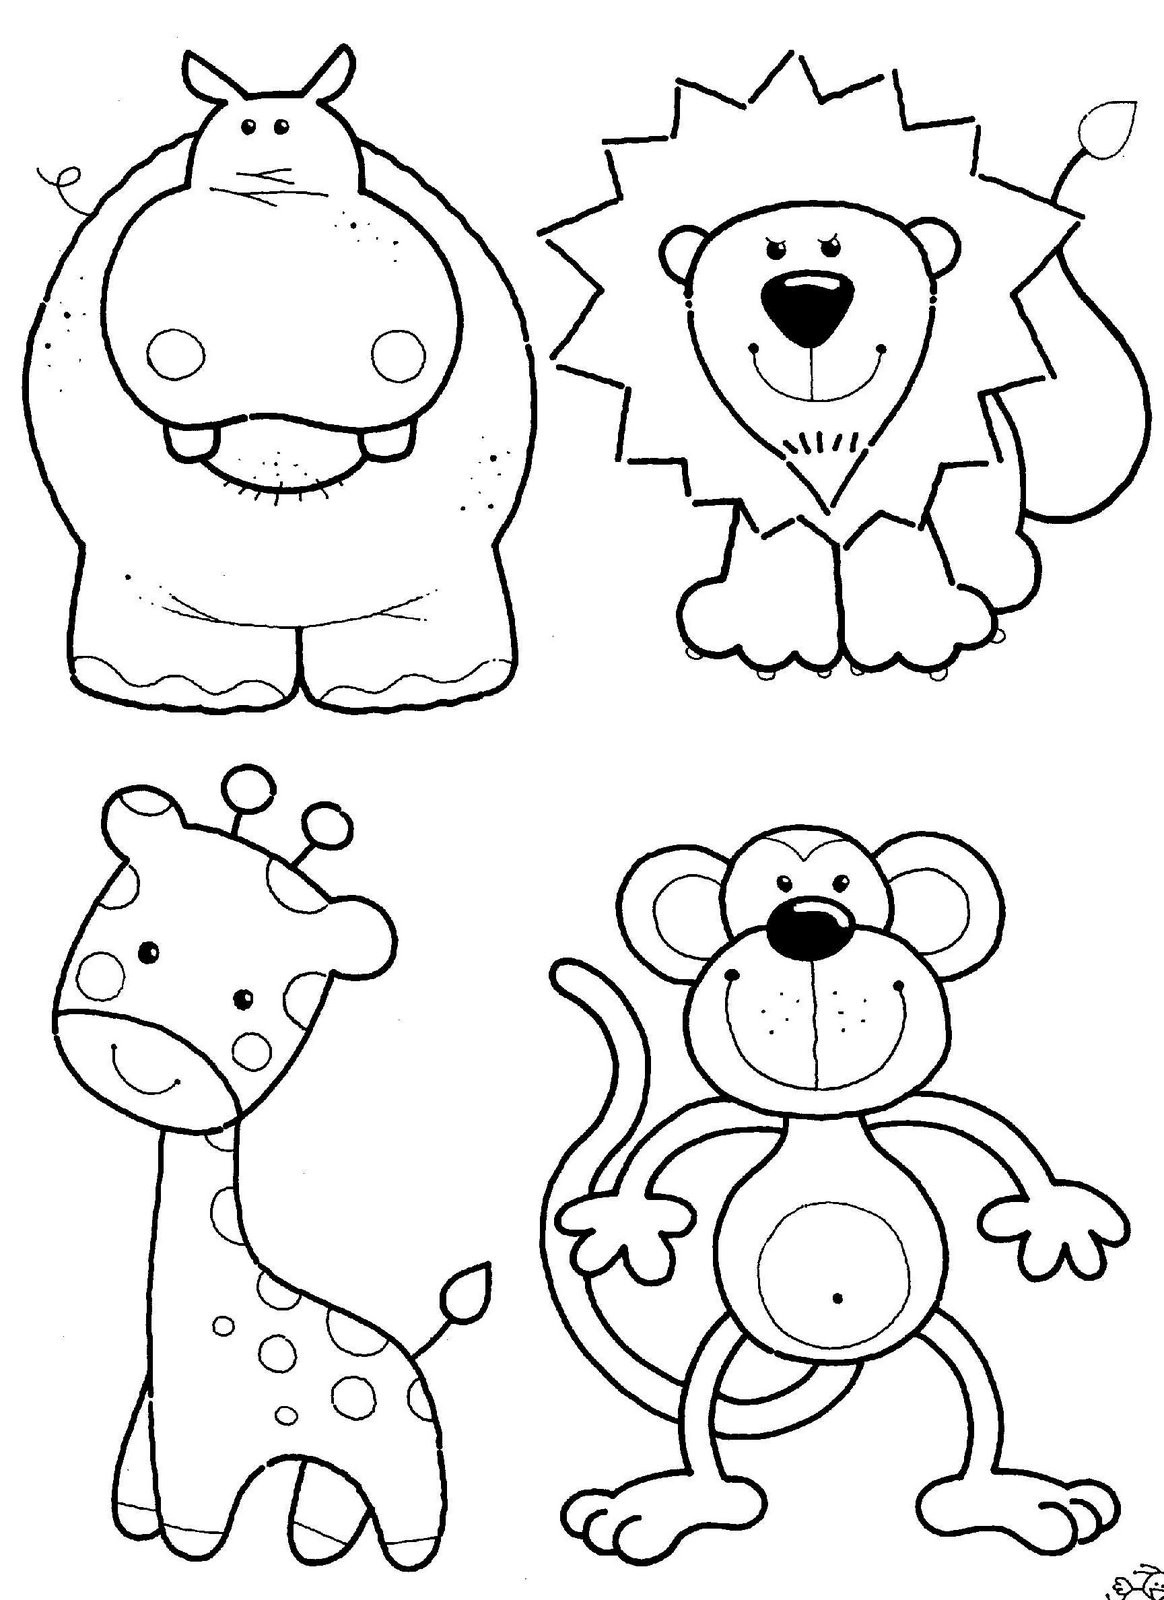 Printable Animal Coloring Pages For Kids
 Coloring Ville